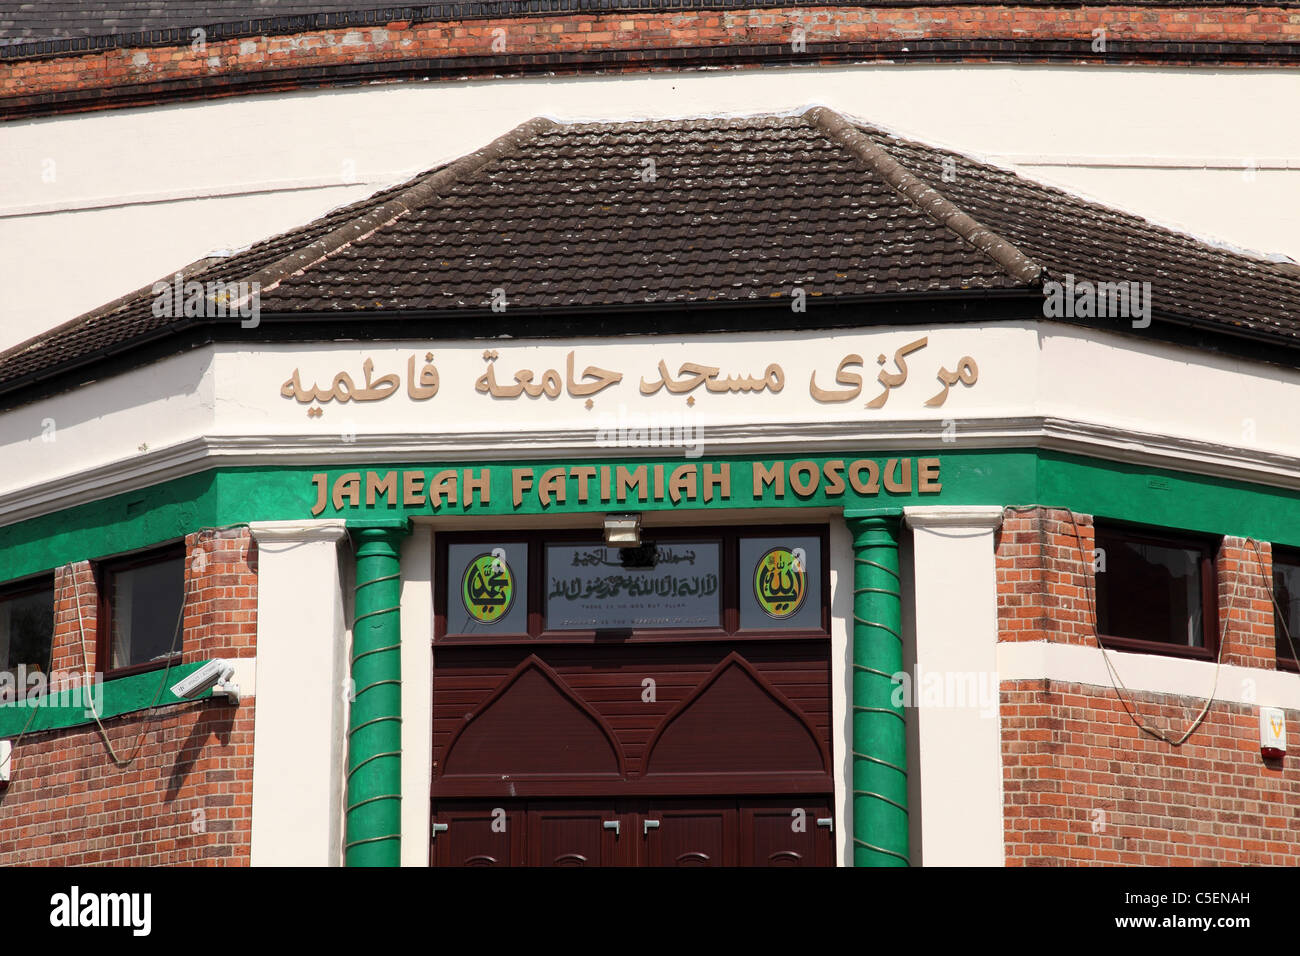 The Jameah Fatimiah Mosque in the Forest Fields area of Nottingham, England, U.K. Stock Photo